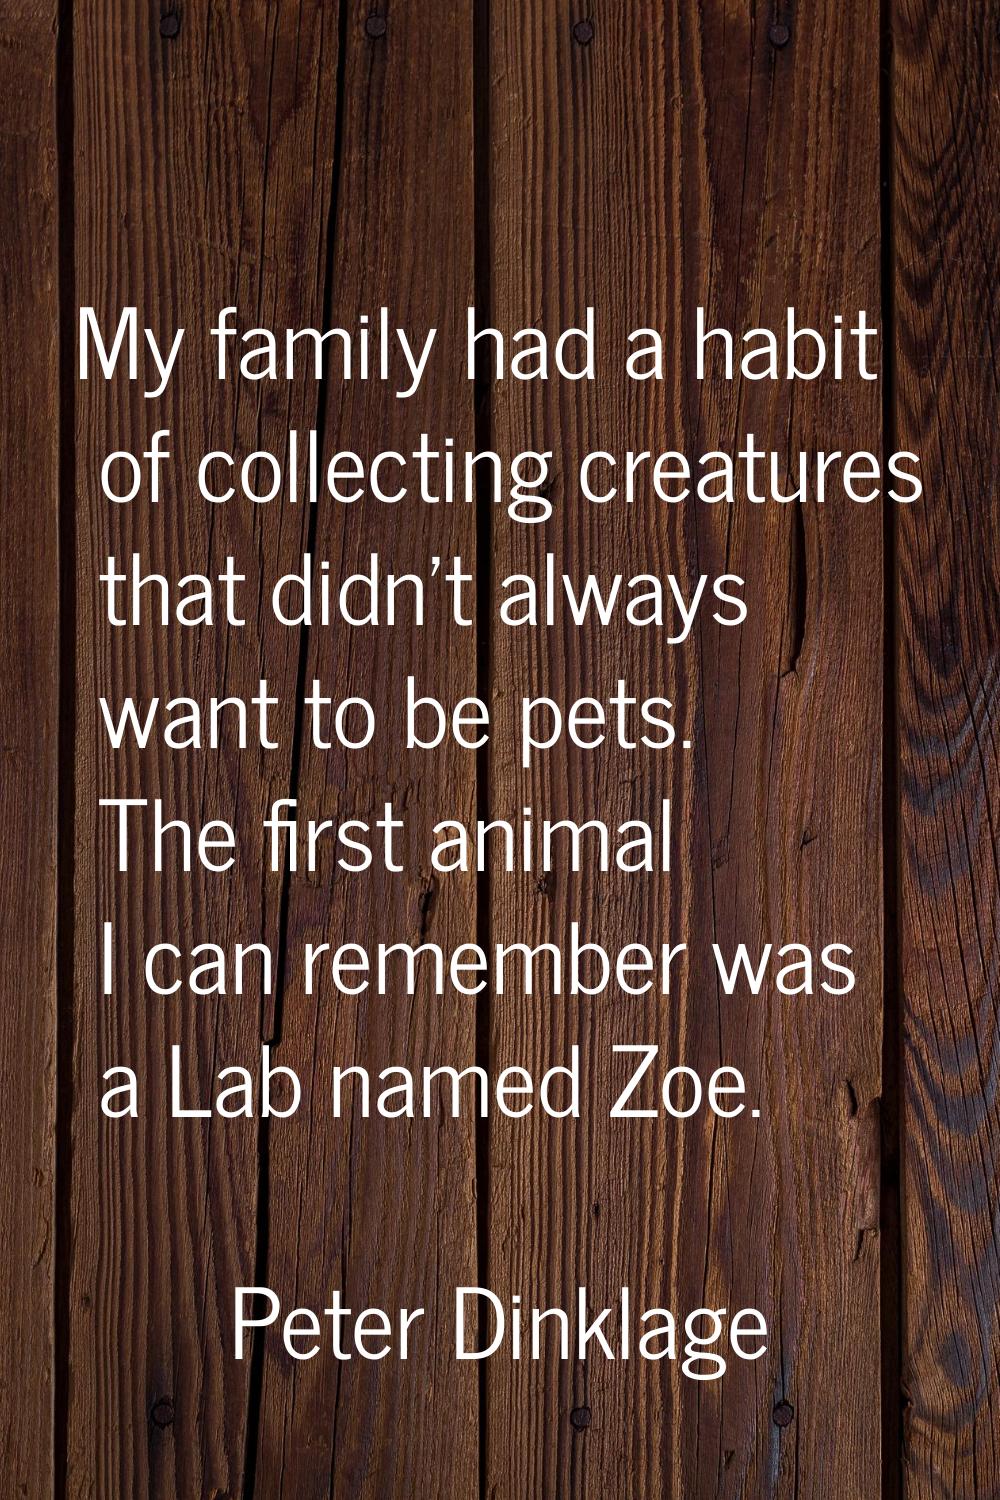 My family had a habit of collecting creatures that didn't always want to be pets. The first animal 